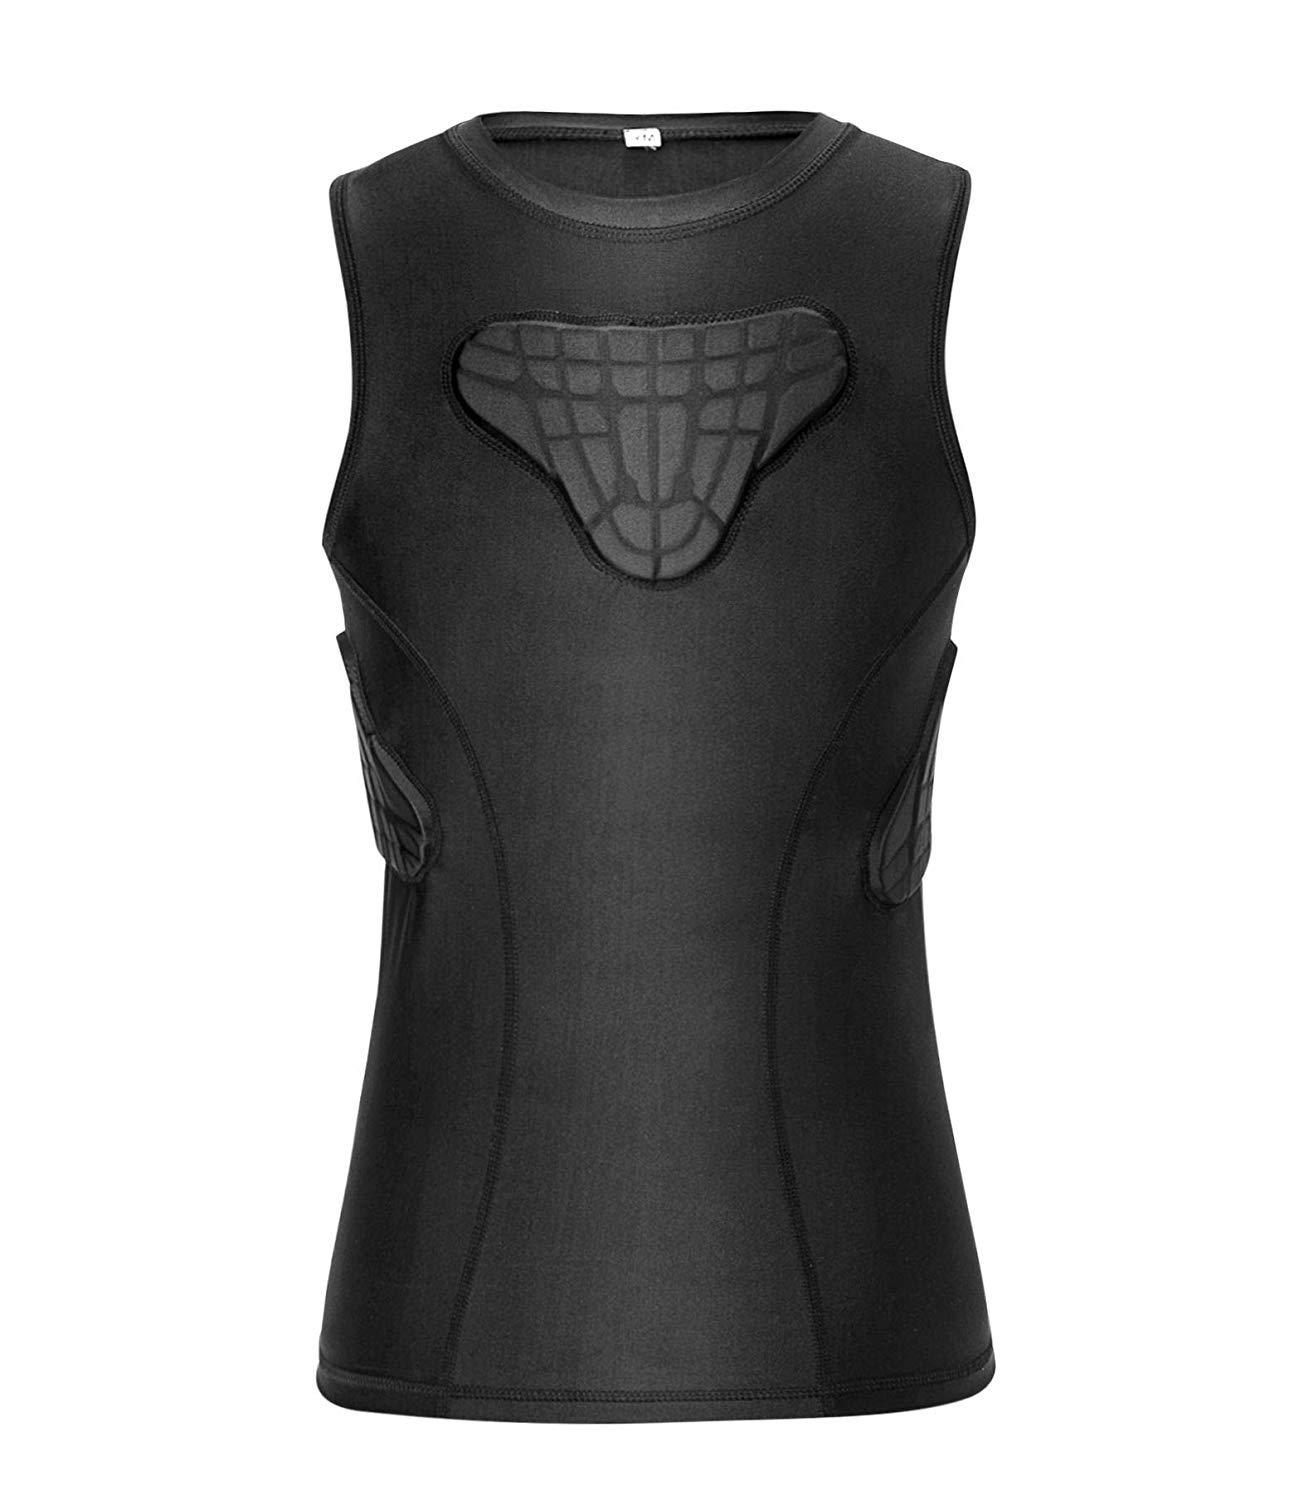  TUOY Men's Padded Compression Shirt Padded Football